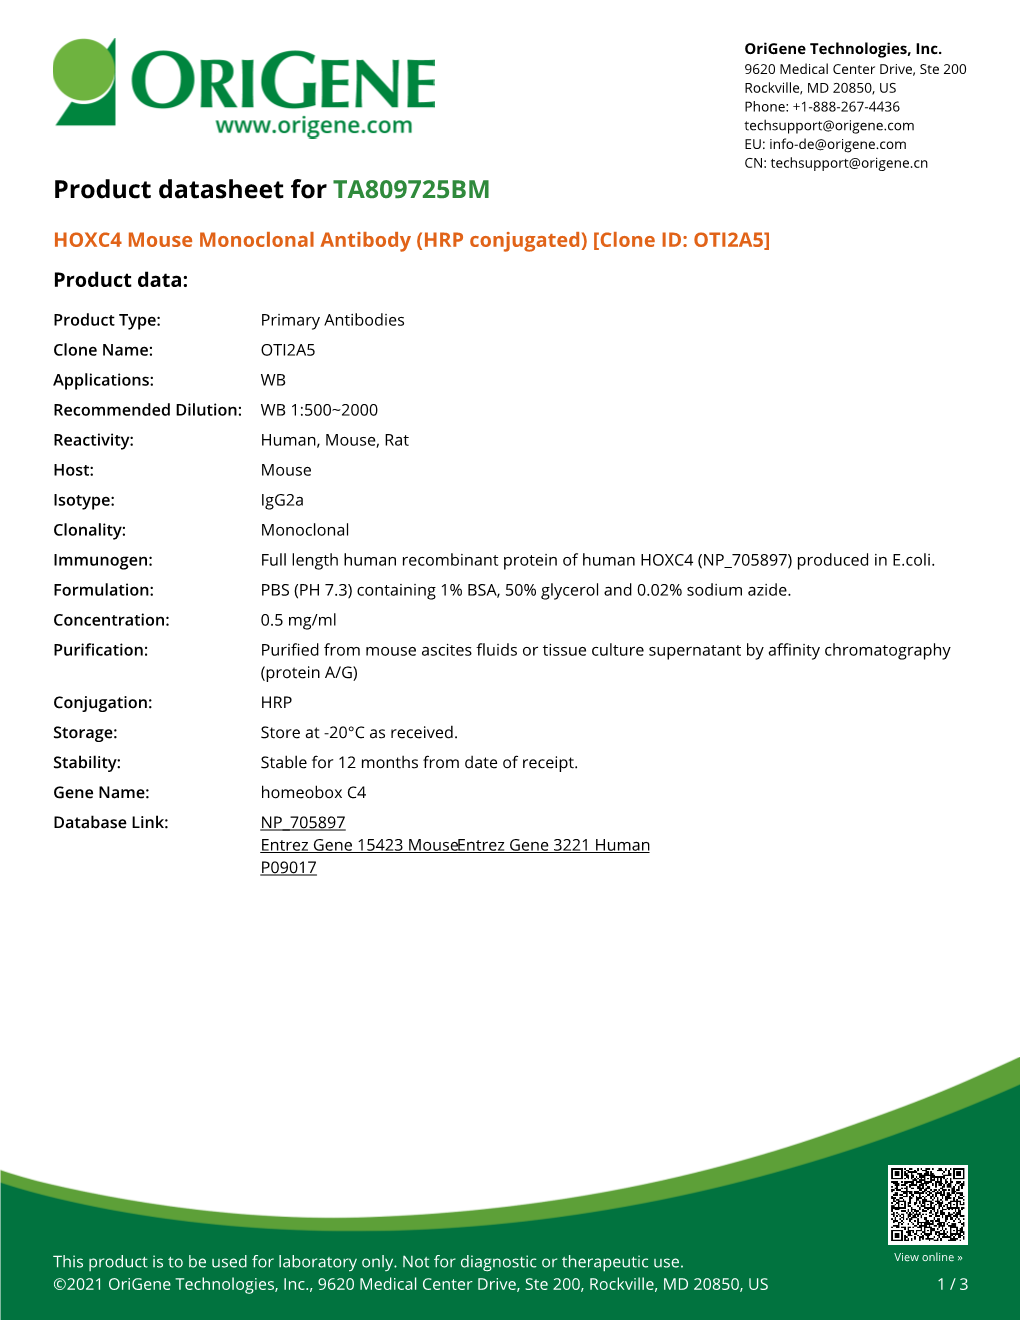 HOXC4 Mouse Monoclonal Antibody (HRP Conjugated) [Clone ID: OTI2A5] Product Data